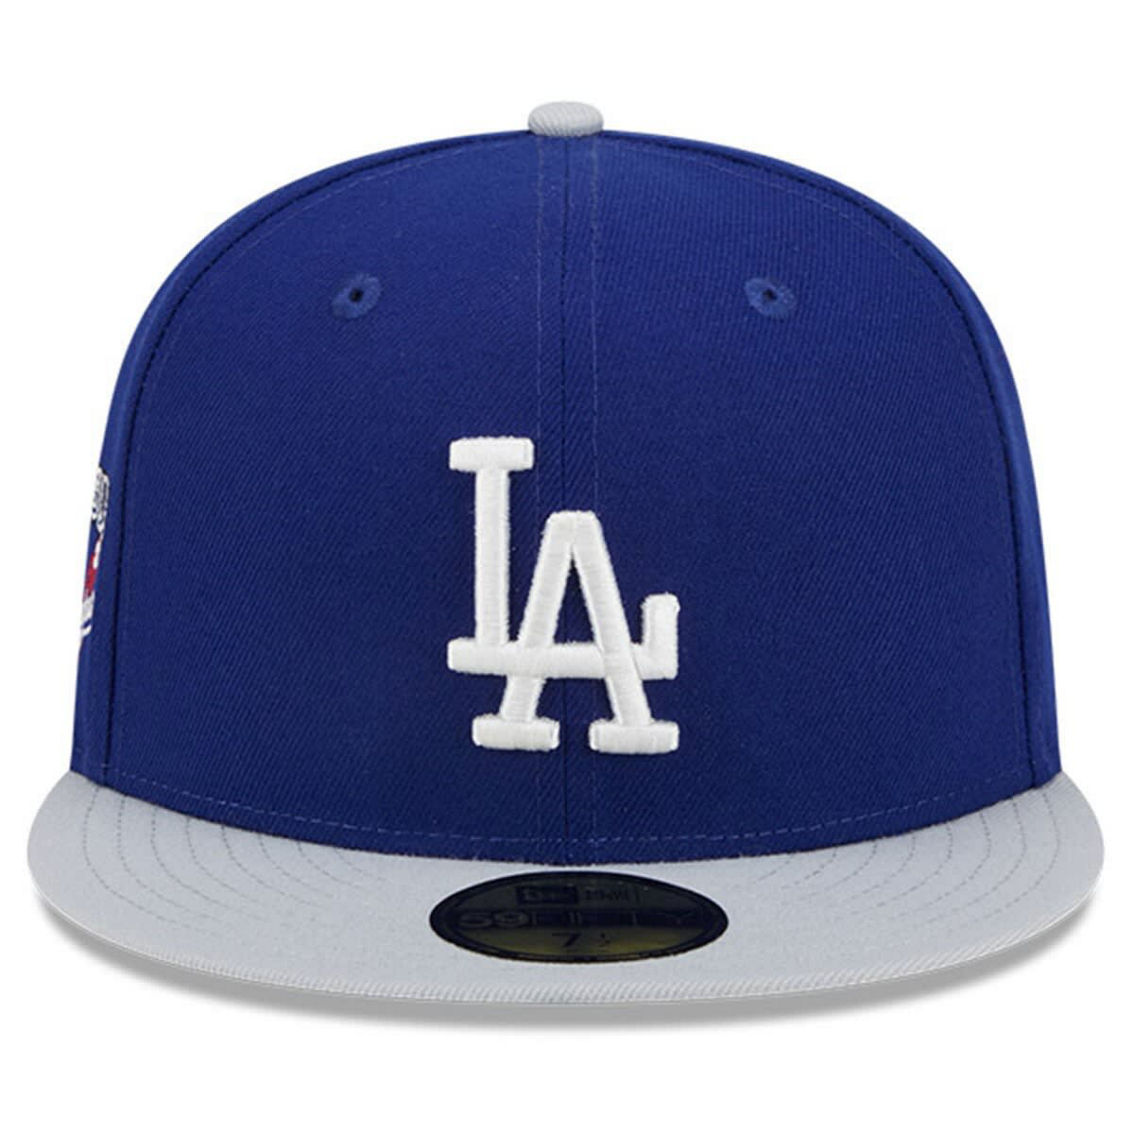 New Era Men's Royal Los Angeles Dodgers Big League Chew Team 59FIFTY Fitted Hat - Image 3 of 4